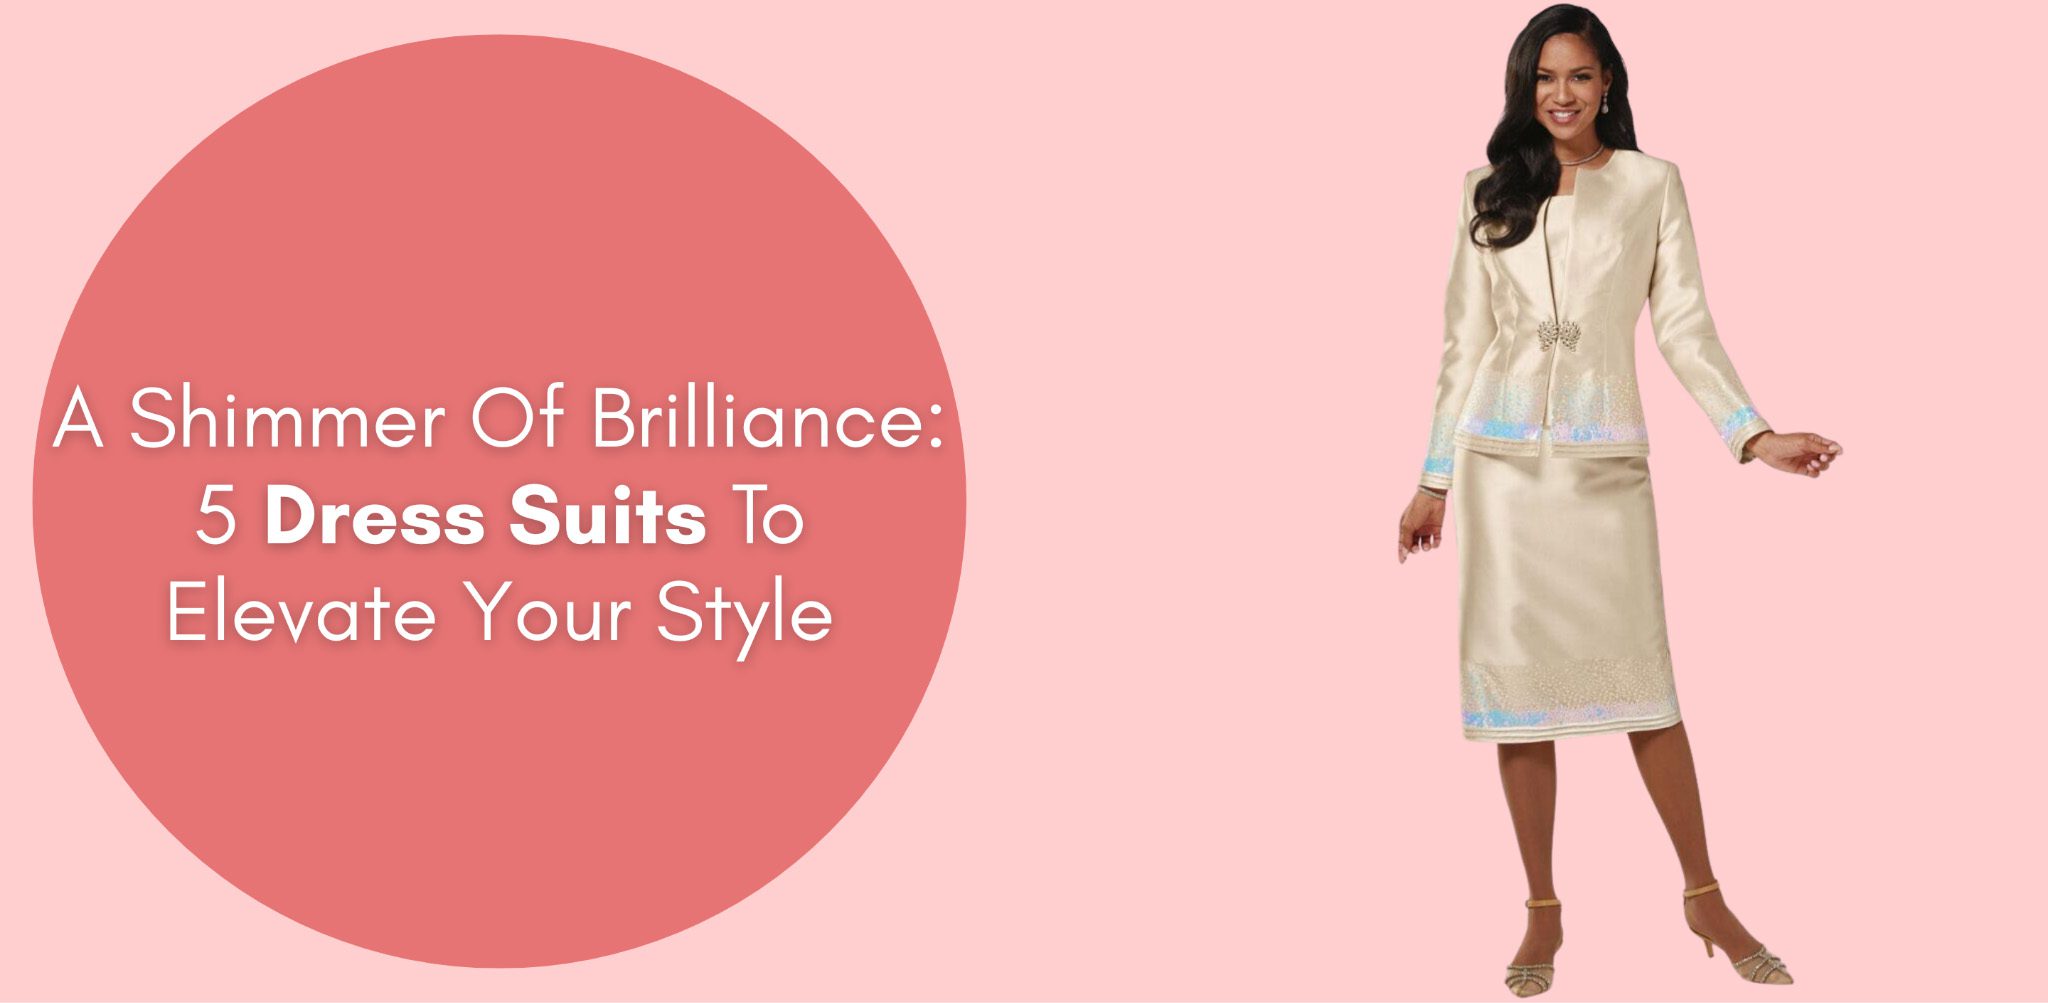 a shimmer of brilliance 5 dress suits to elevate your style